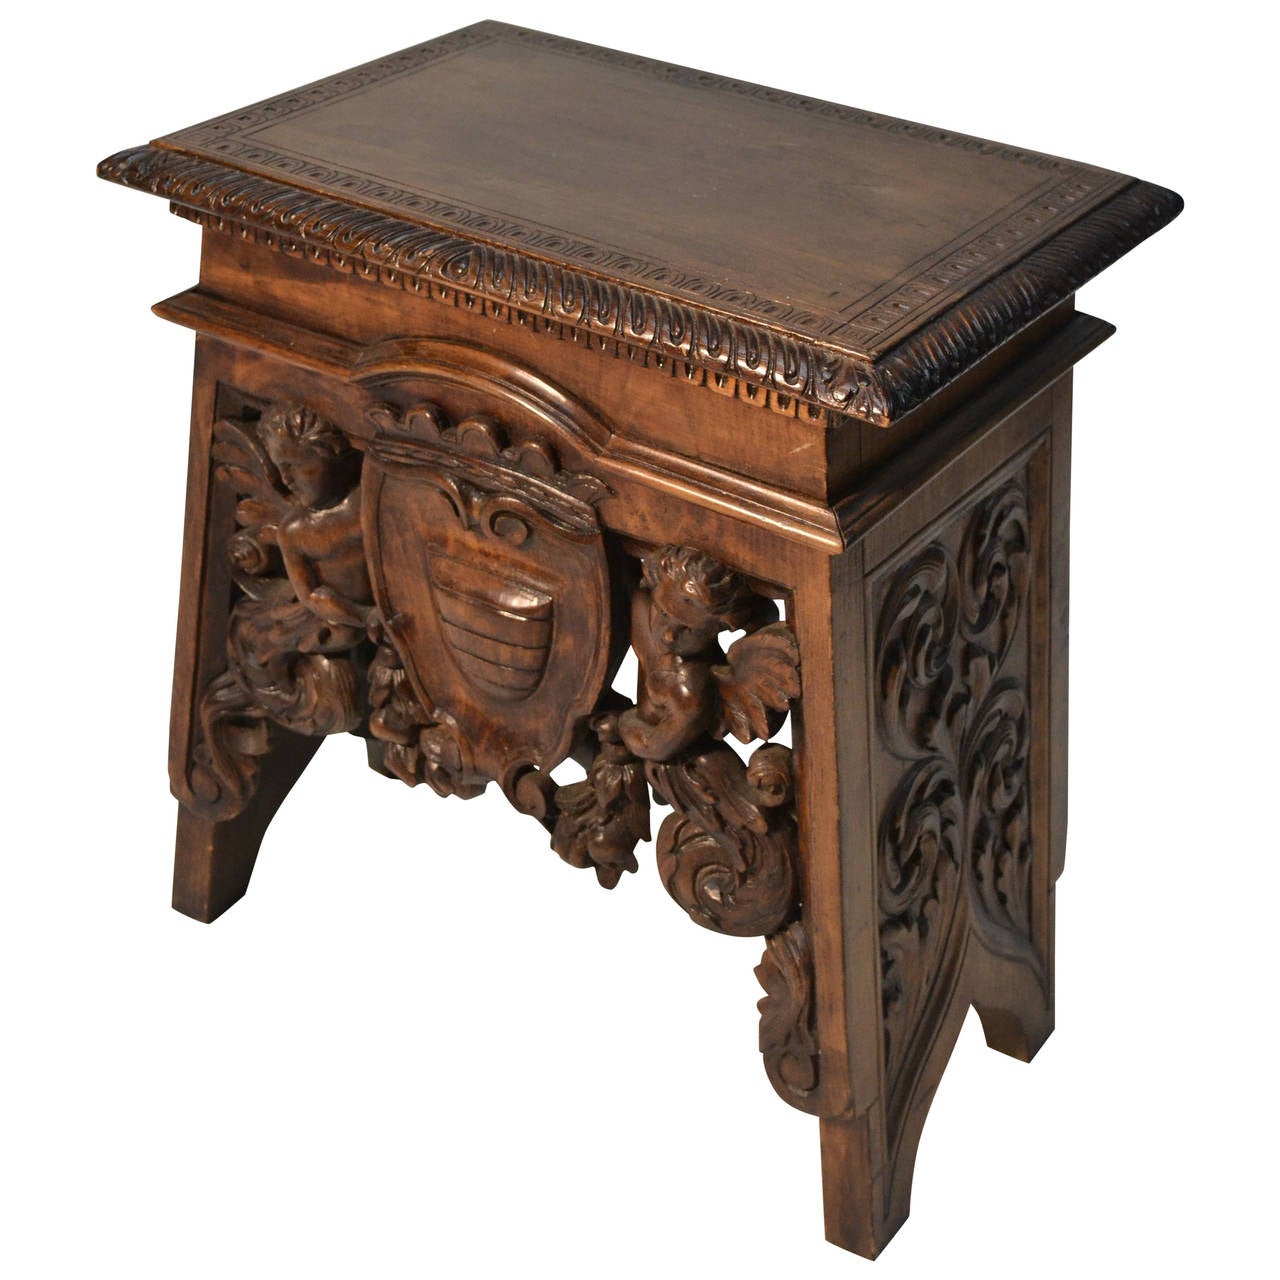 Renaissance revival carved stool/table For Sale